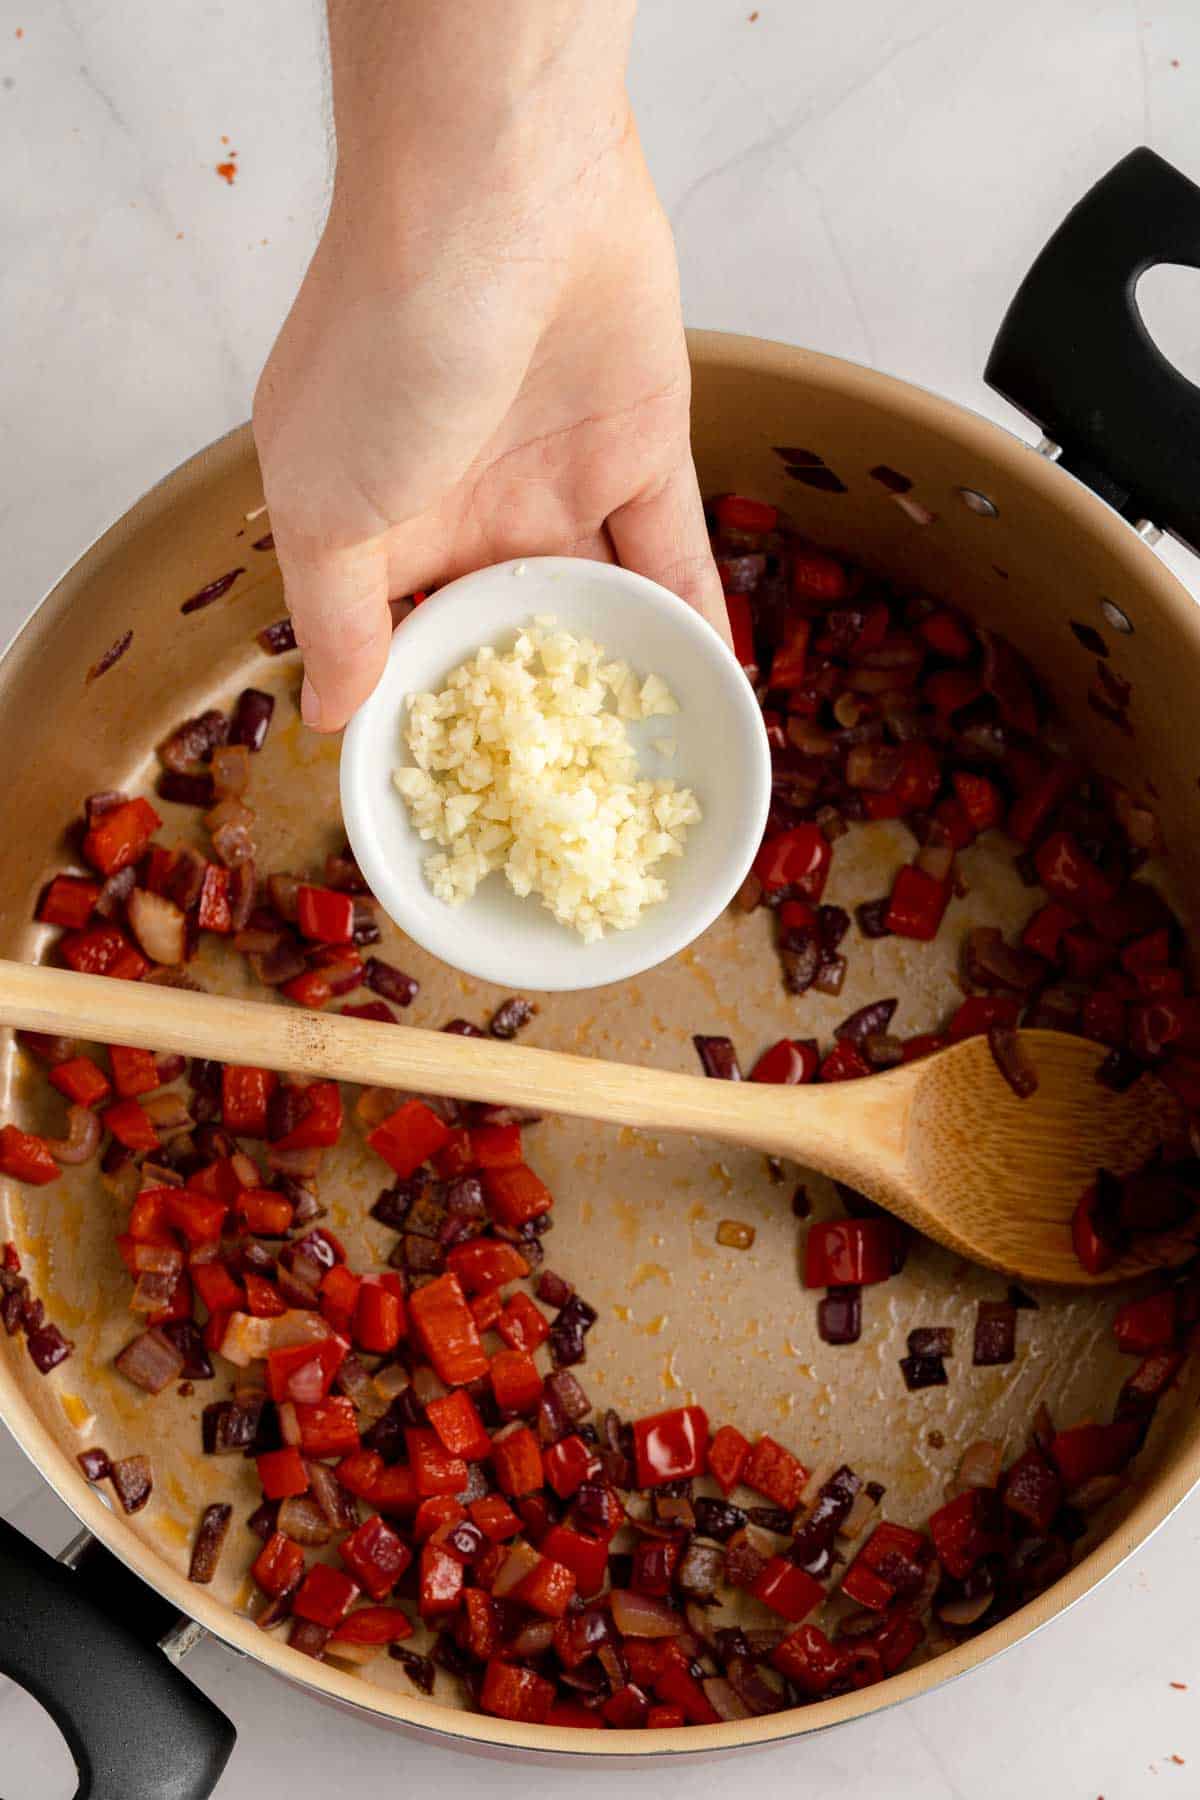 Adding garlic to a sauteed mix of onions and red peppers.